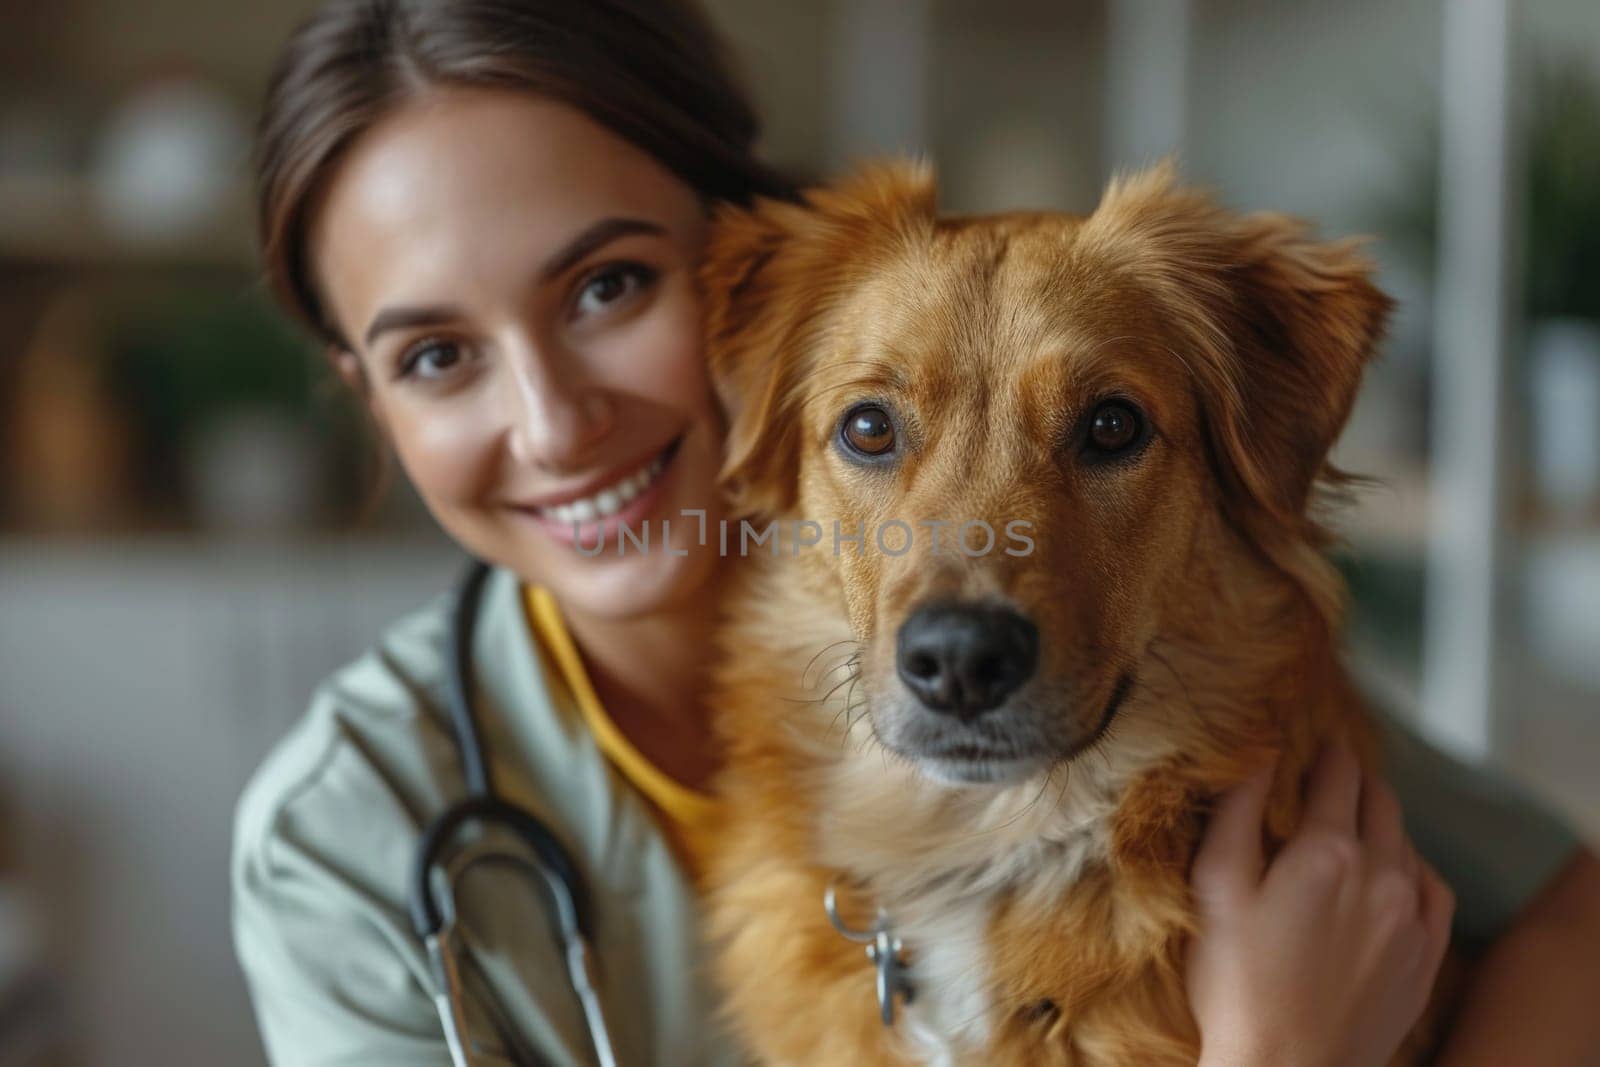 Veterinarian services at home: caring for your pet with professional attention.